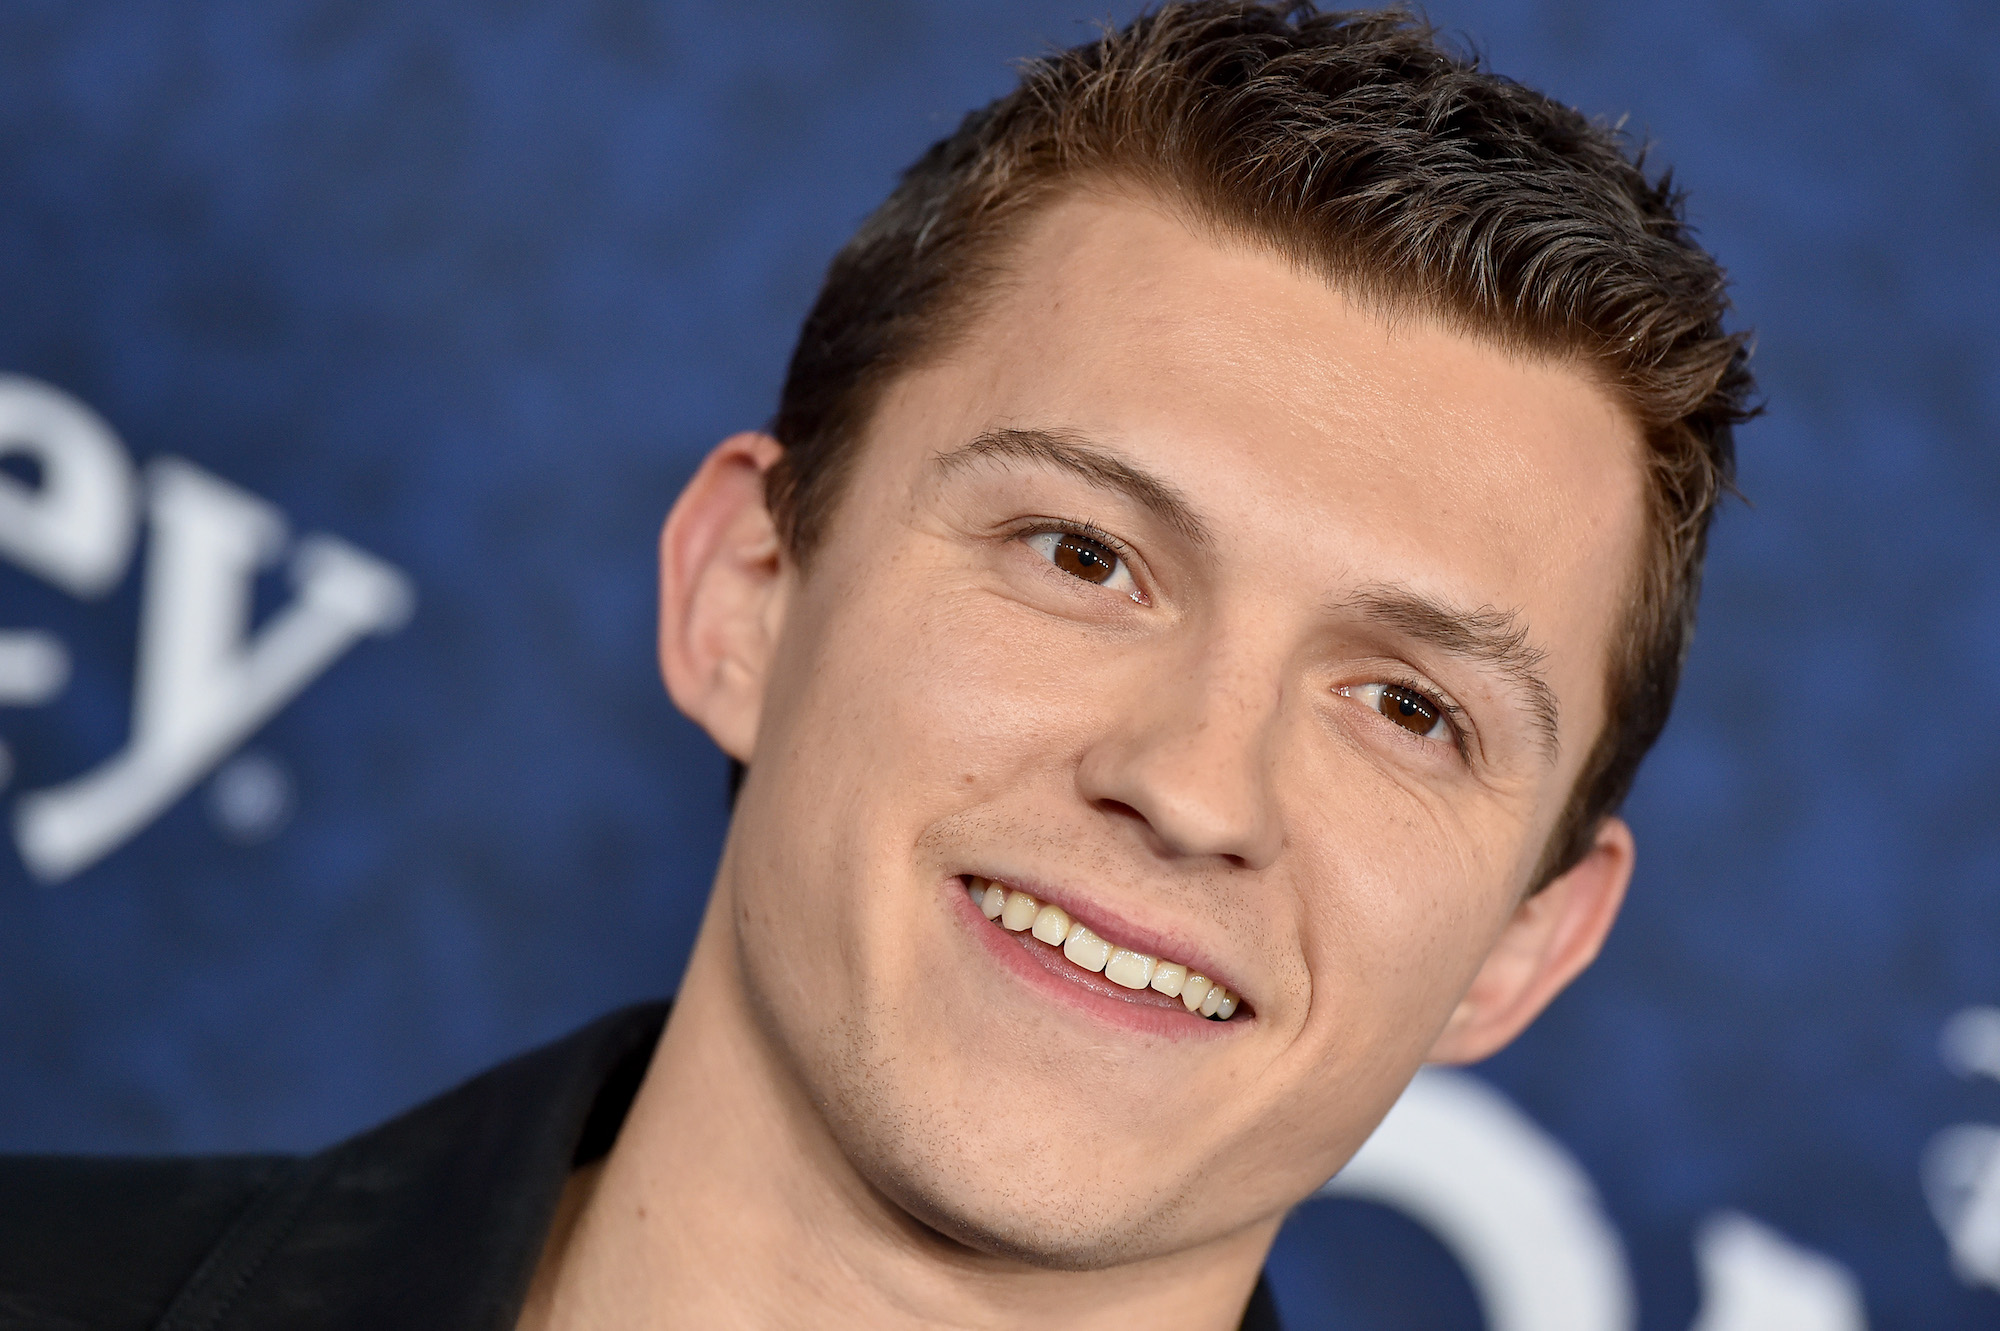 Marvel Star Tom Holland Made an Under-the-Radar MCU Spider-Man Cameo Before His Debut Film